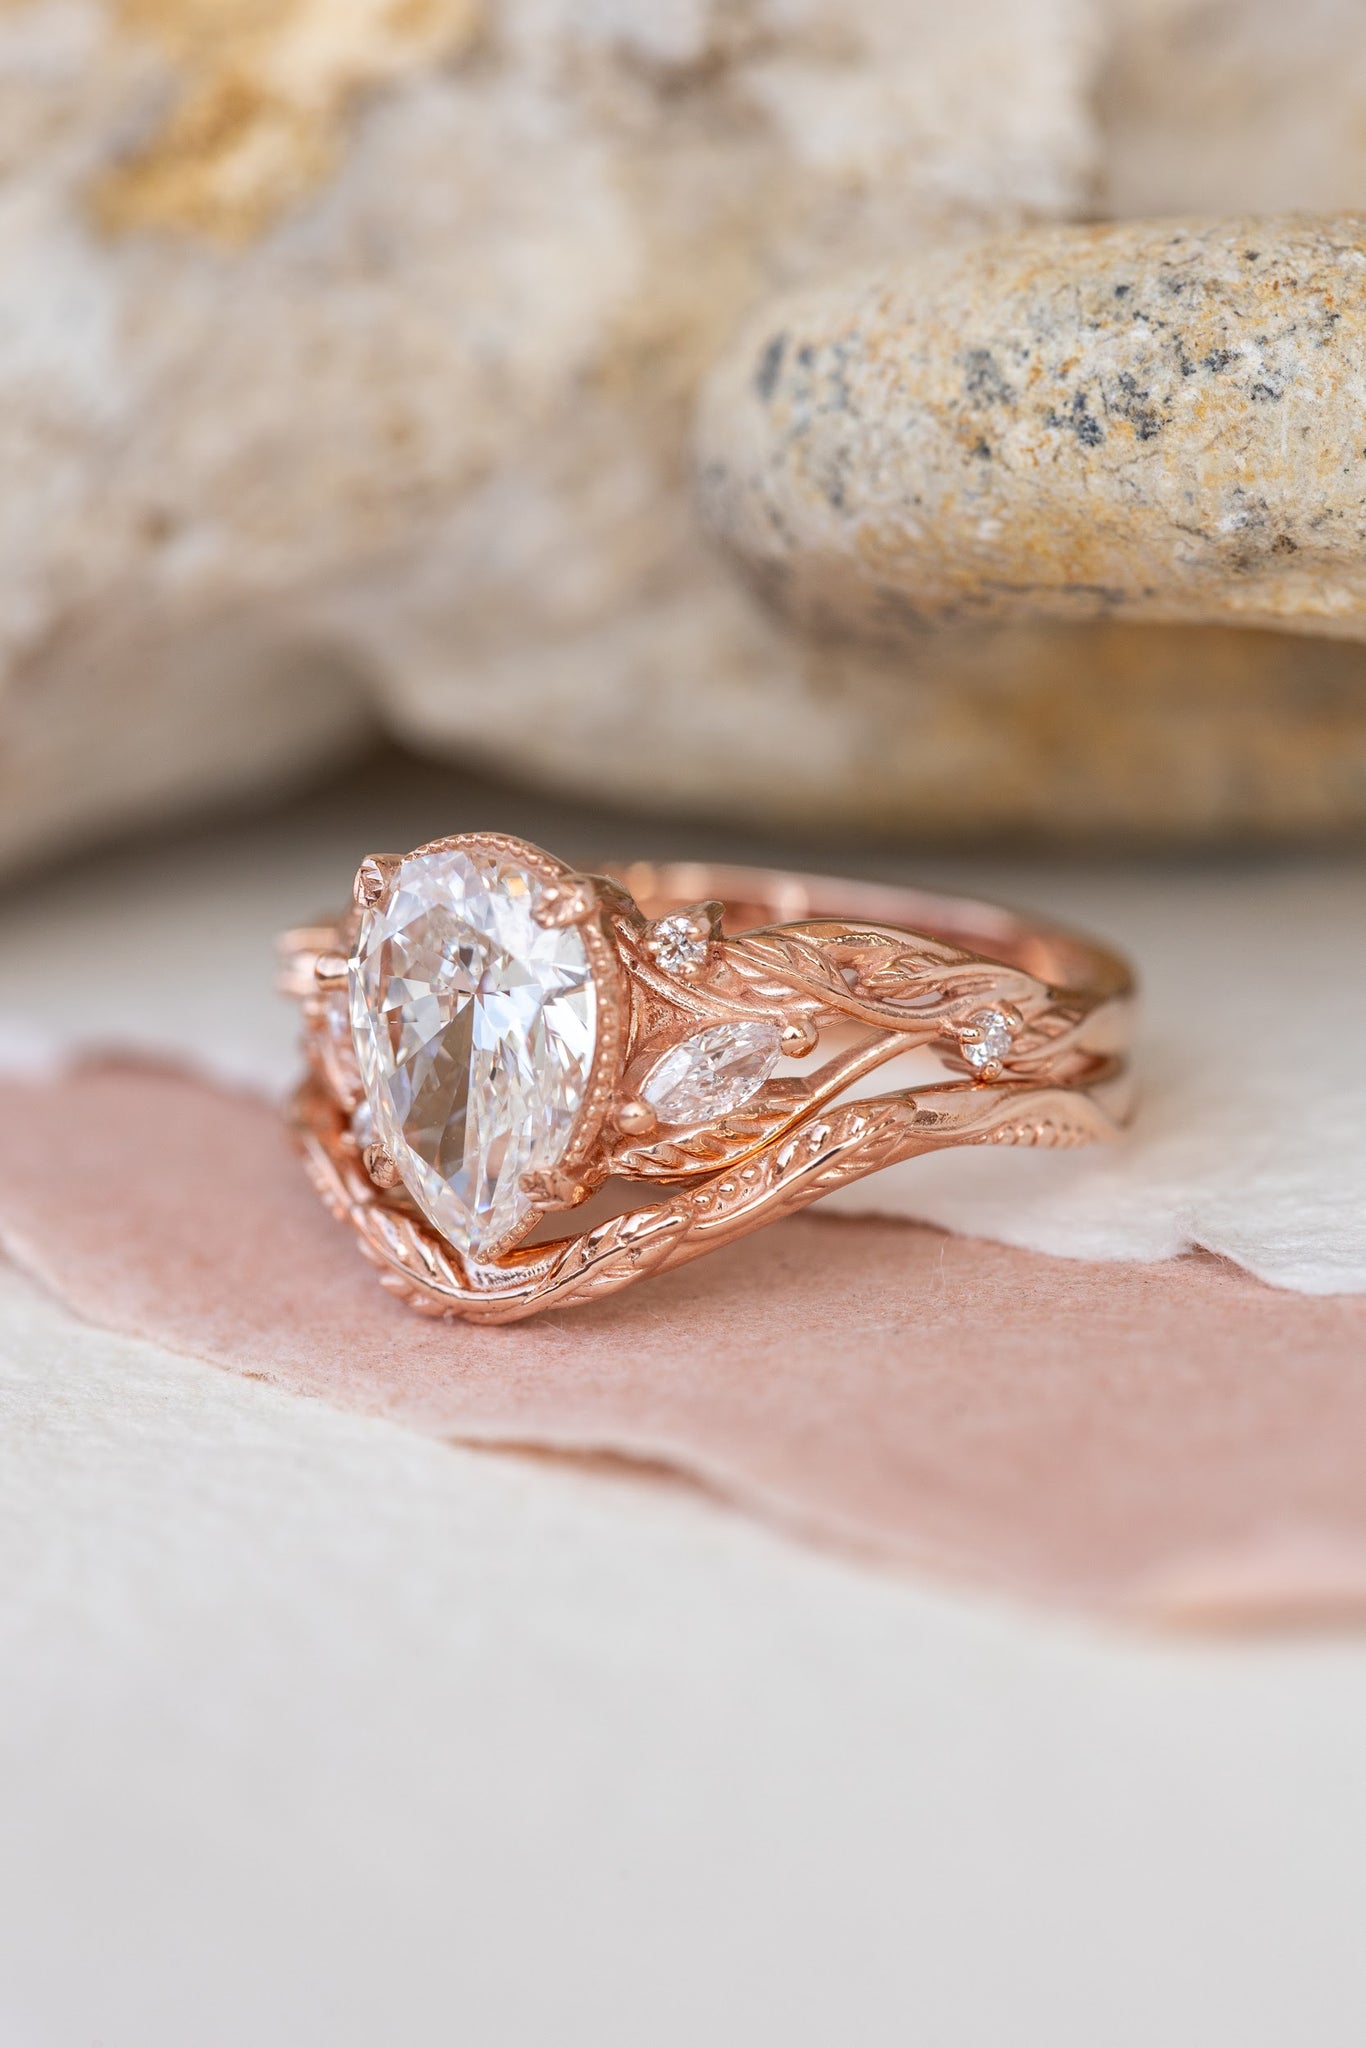 Vines and leaves engagement ring with lab-created diamond, rose gold engagement ring / Patricia - Eden Garden Jewelry™